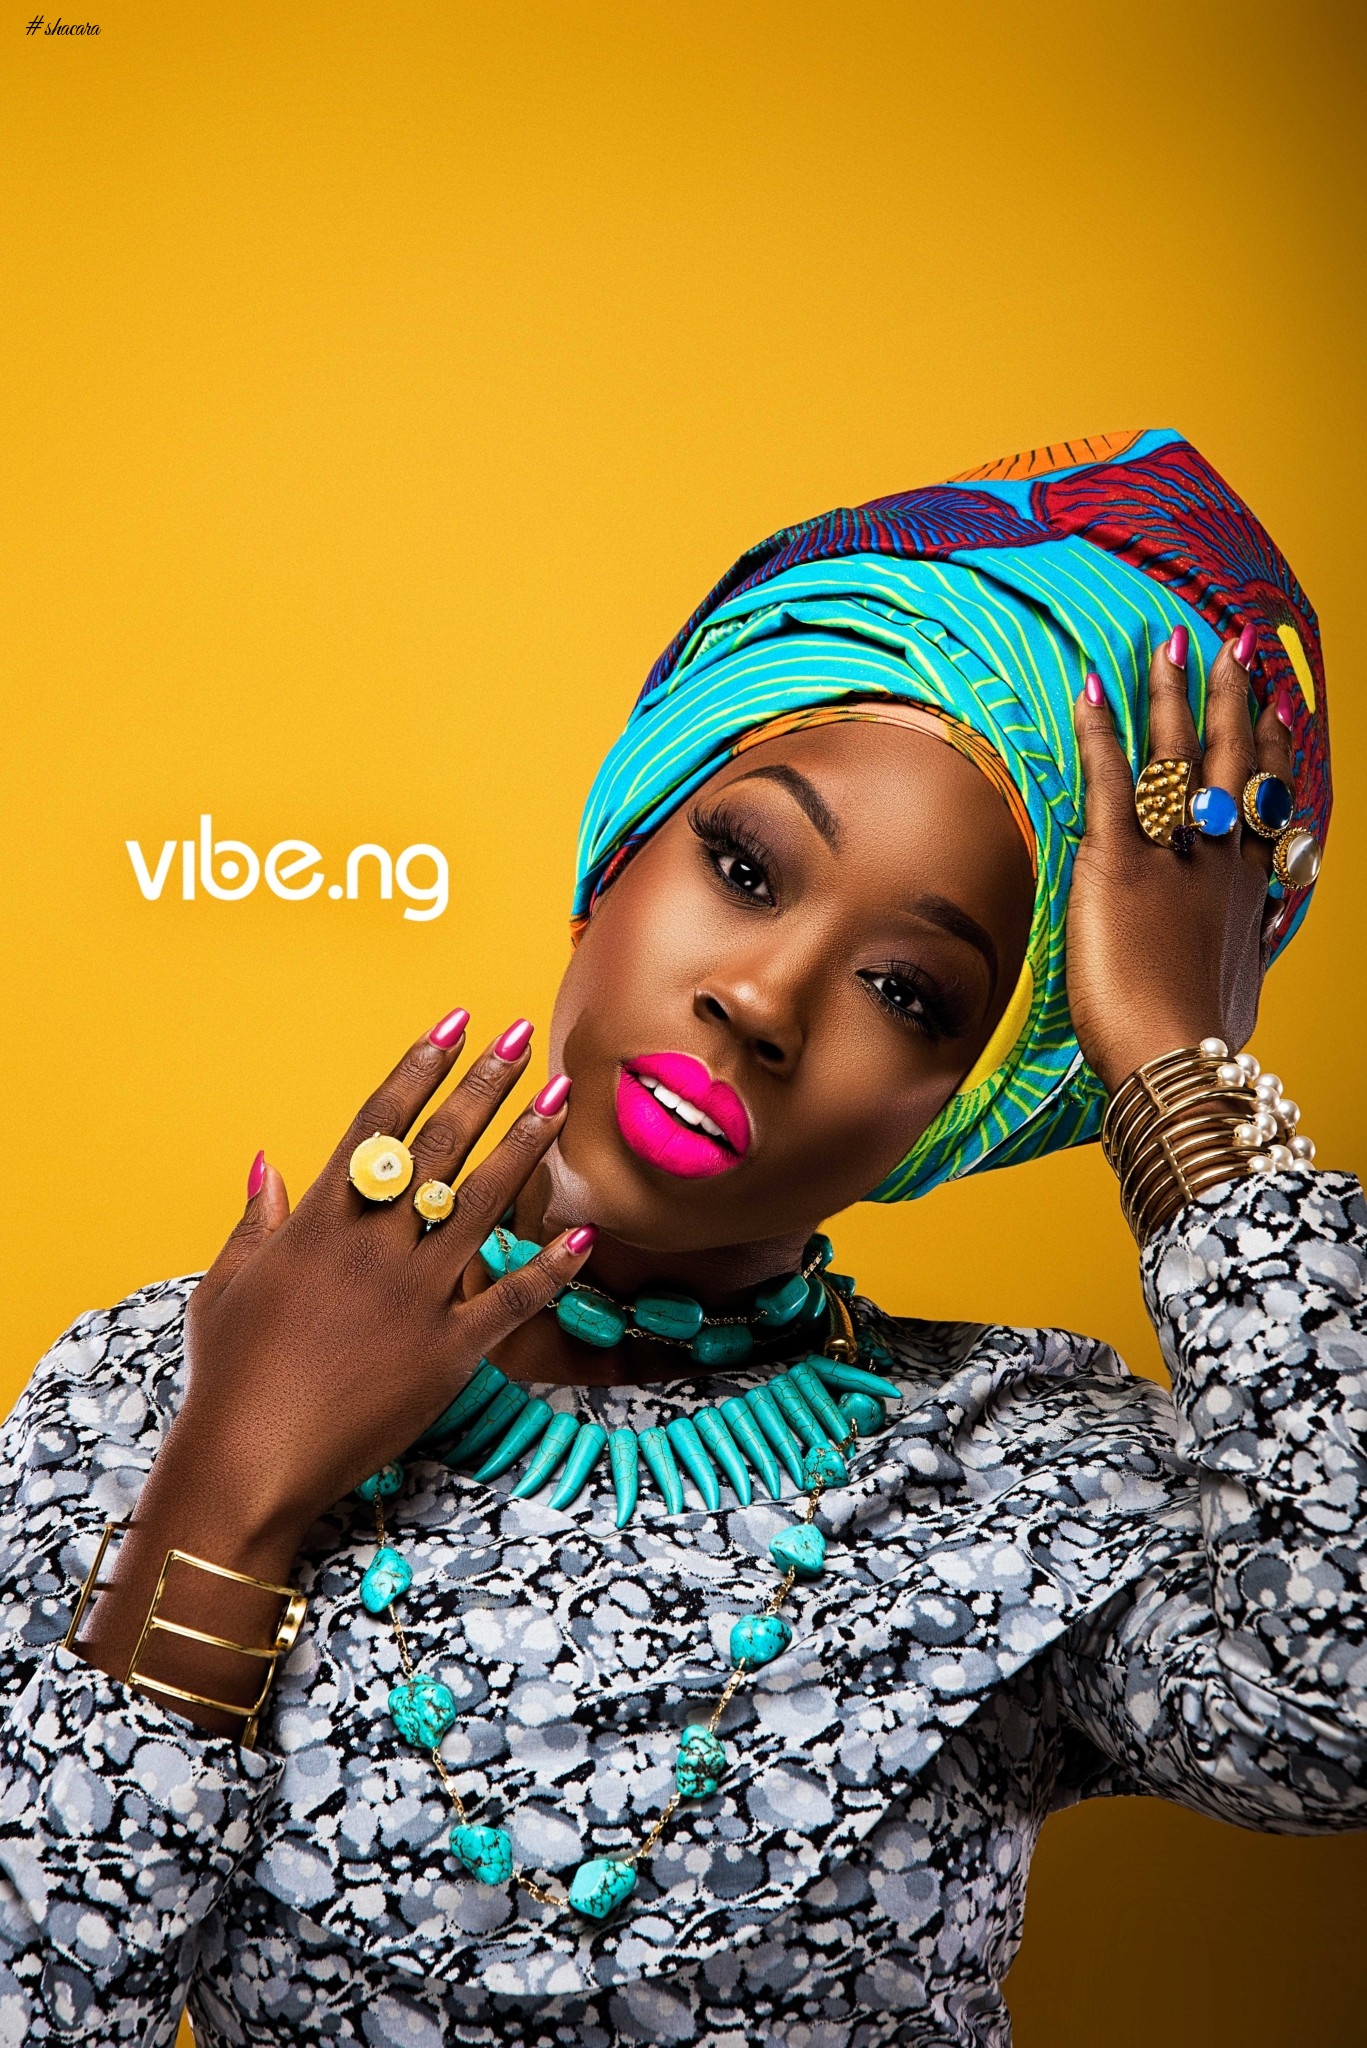 Saucing! Beverly Naya Is Hot On The Cover Of Vibe.Ng Magazine